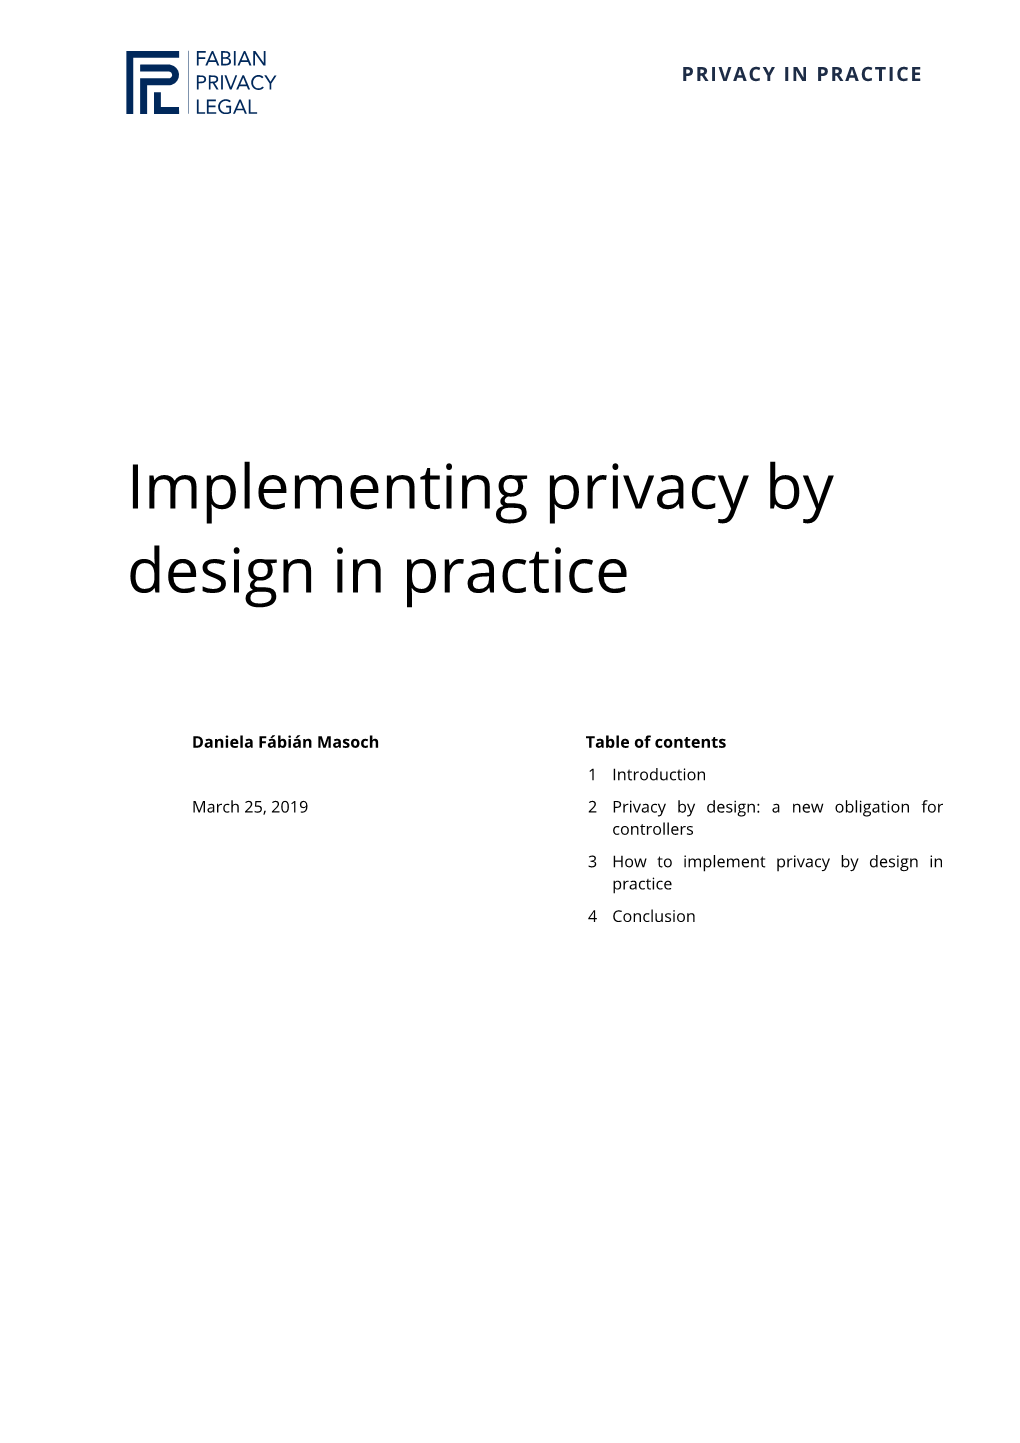 Implementing Privacy by Design in Practice